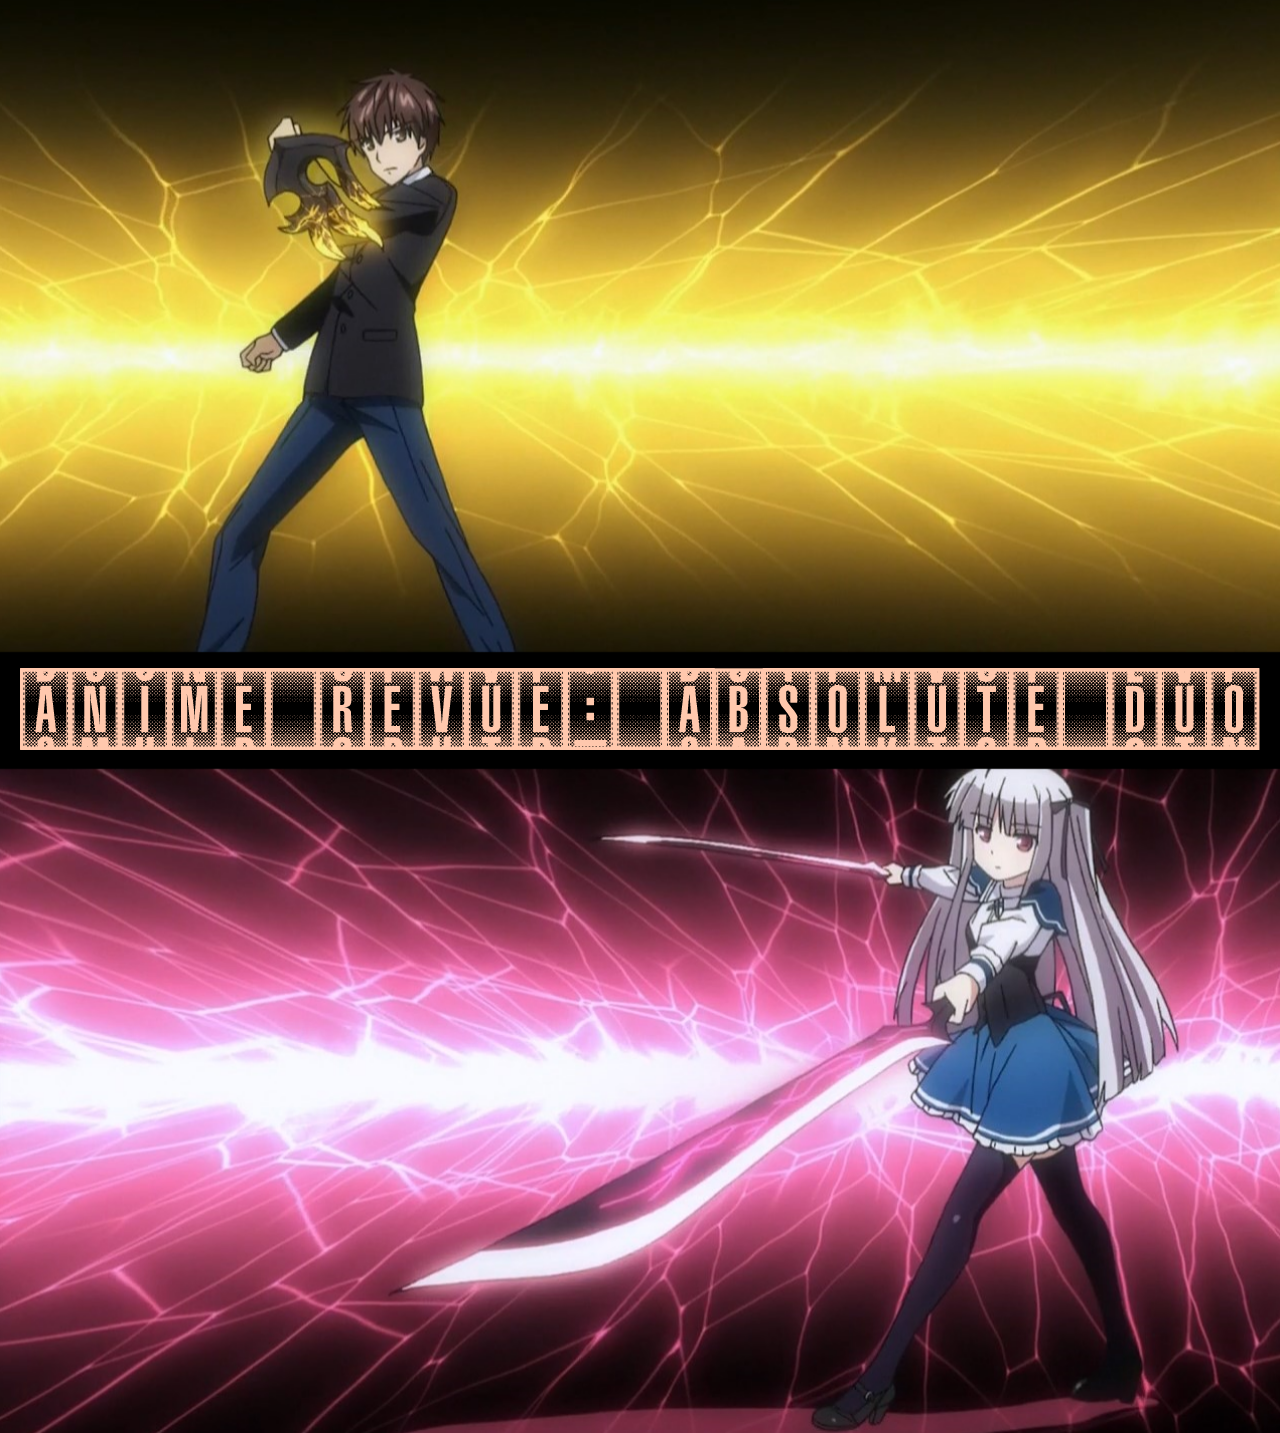 Anime Revue: Absolute Duo